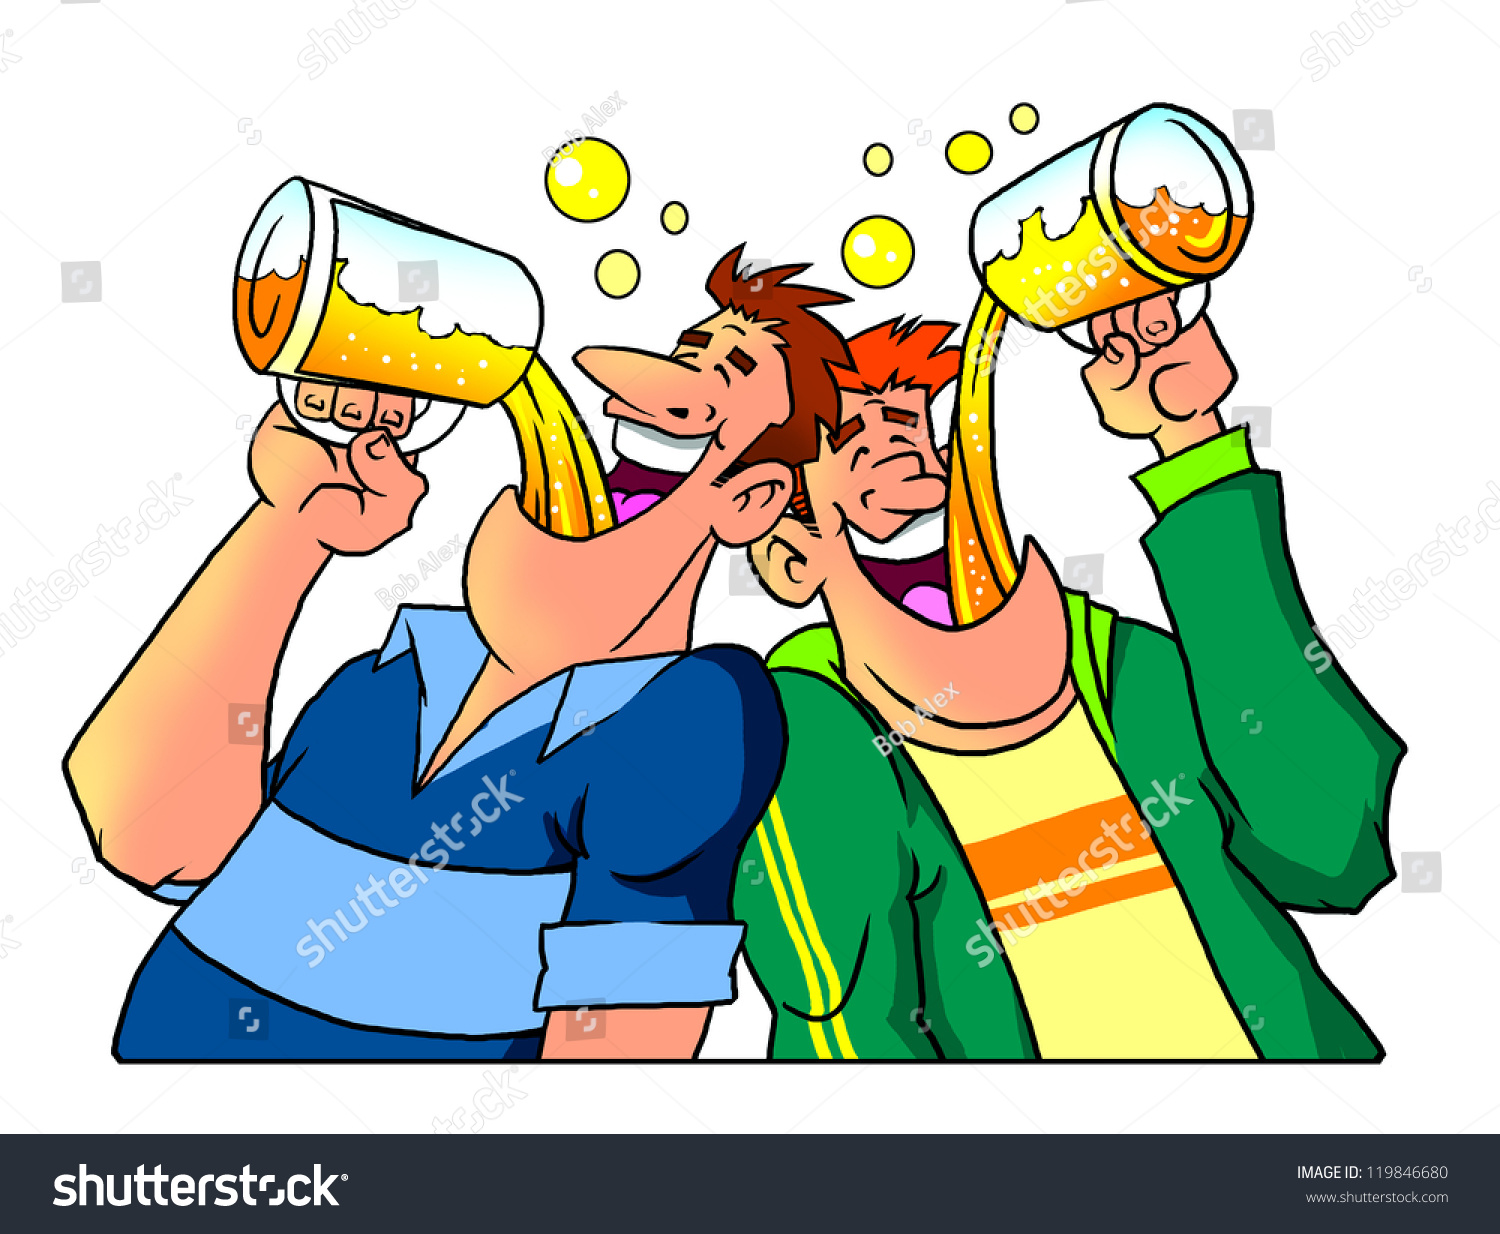 clipart man drinking beer - photo #22